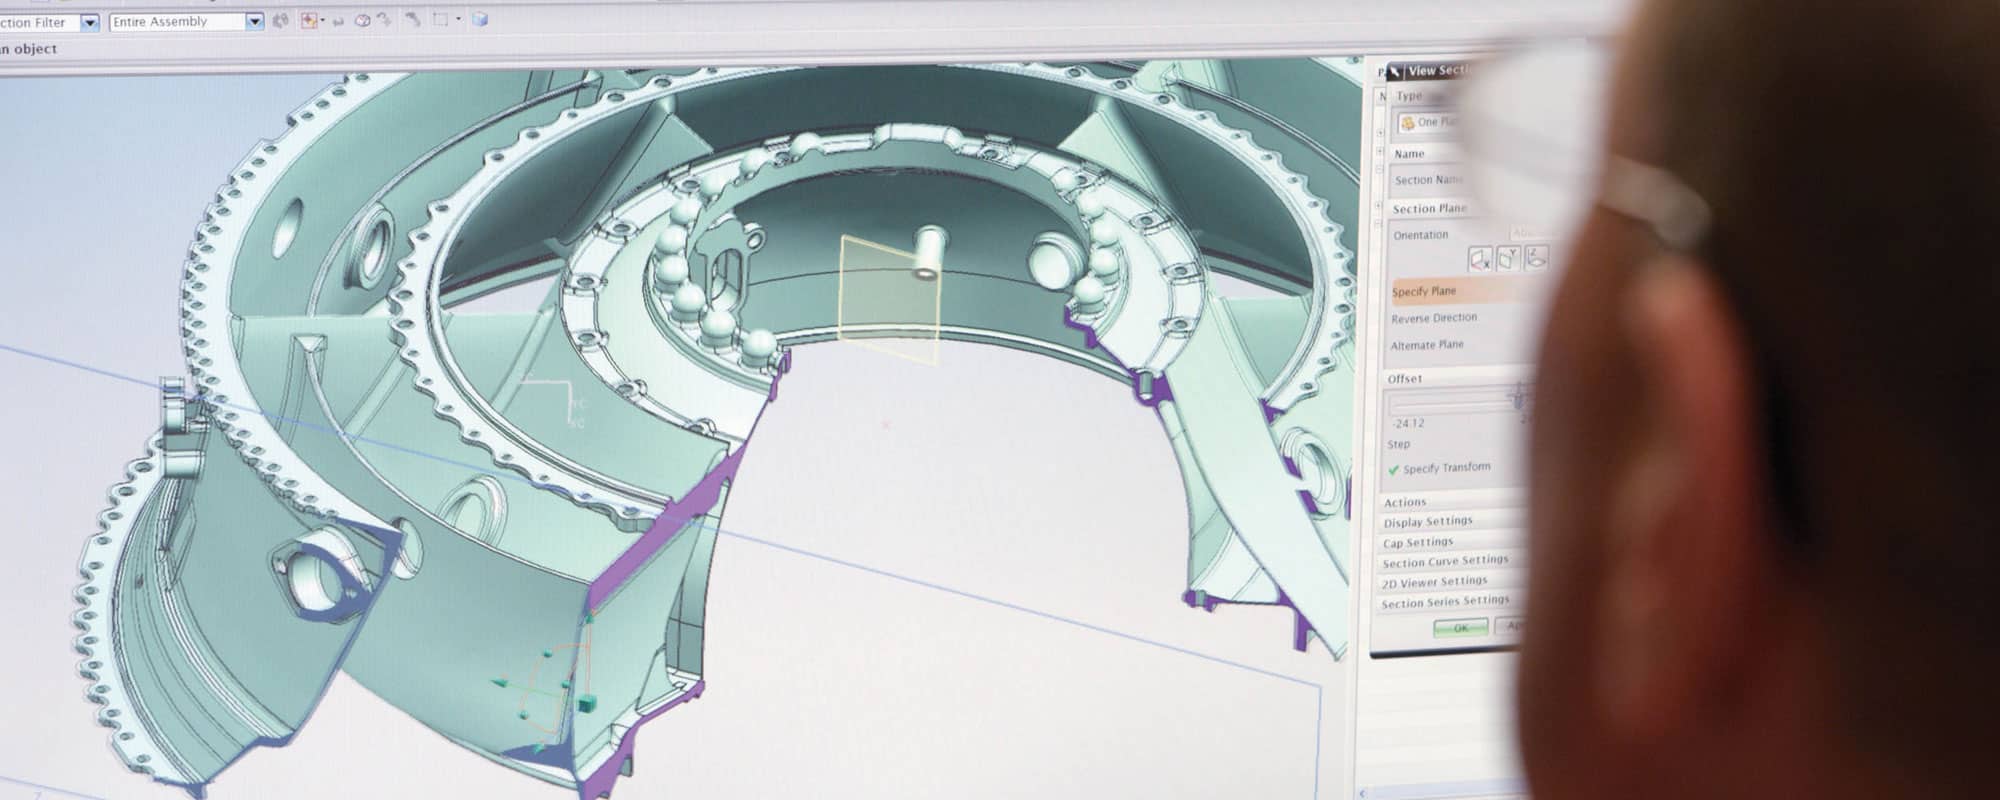 Advanced Bearing System Analysis, Powered by Humans